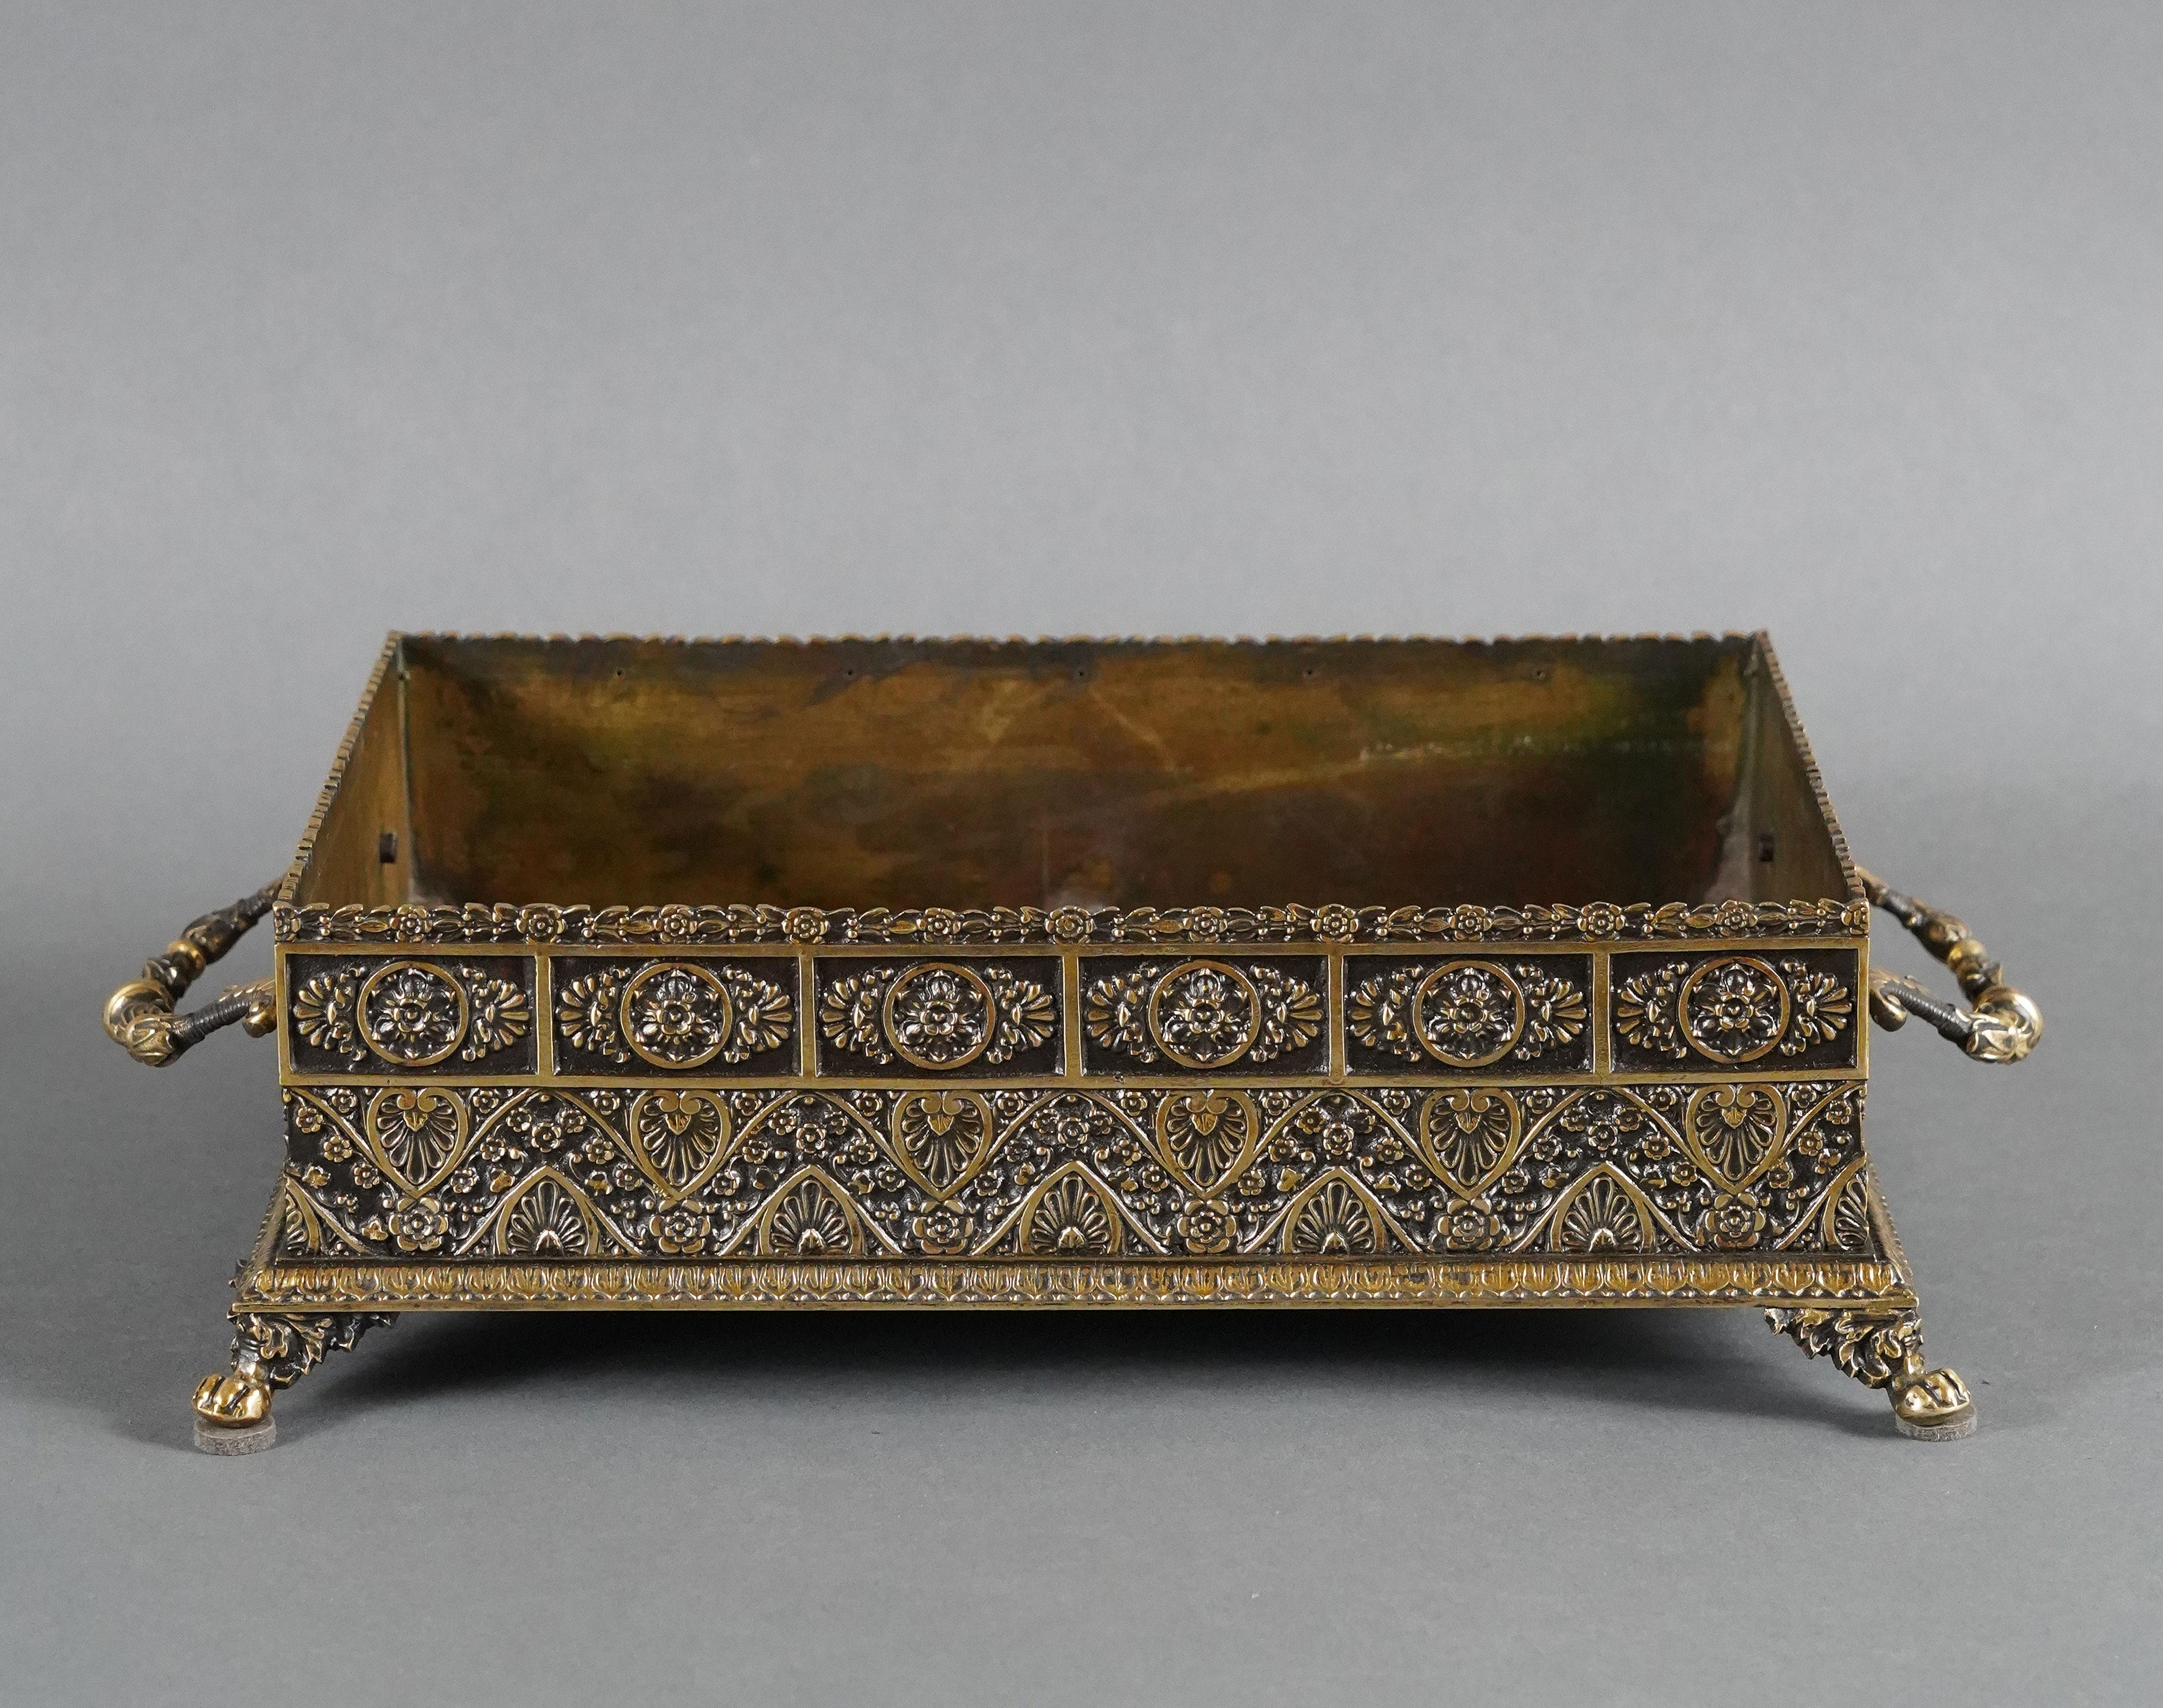 Elegant Orientalist style rectangular planter in patinated and gilded bronze, resting on four lion paws. It is adorned with decorative friezes of water leaves, stylized floral medallions and palmettes on a scattering of flowers.